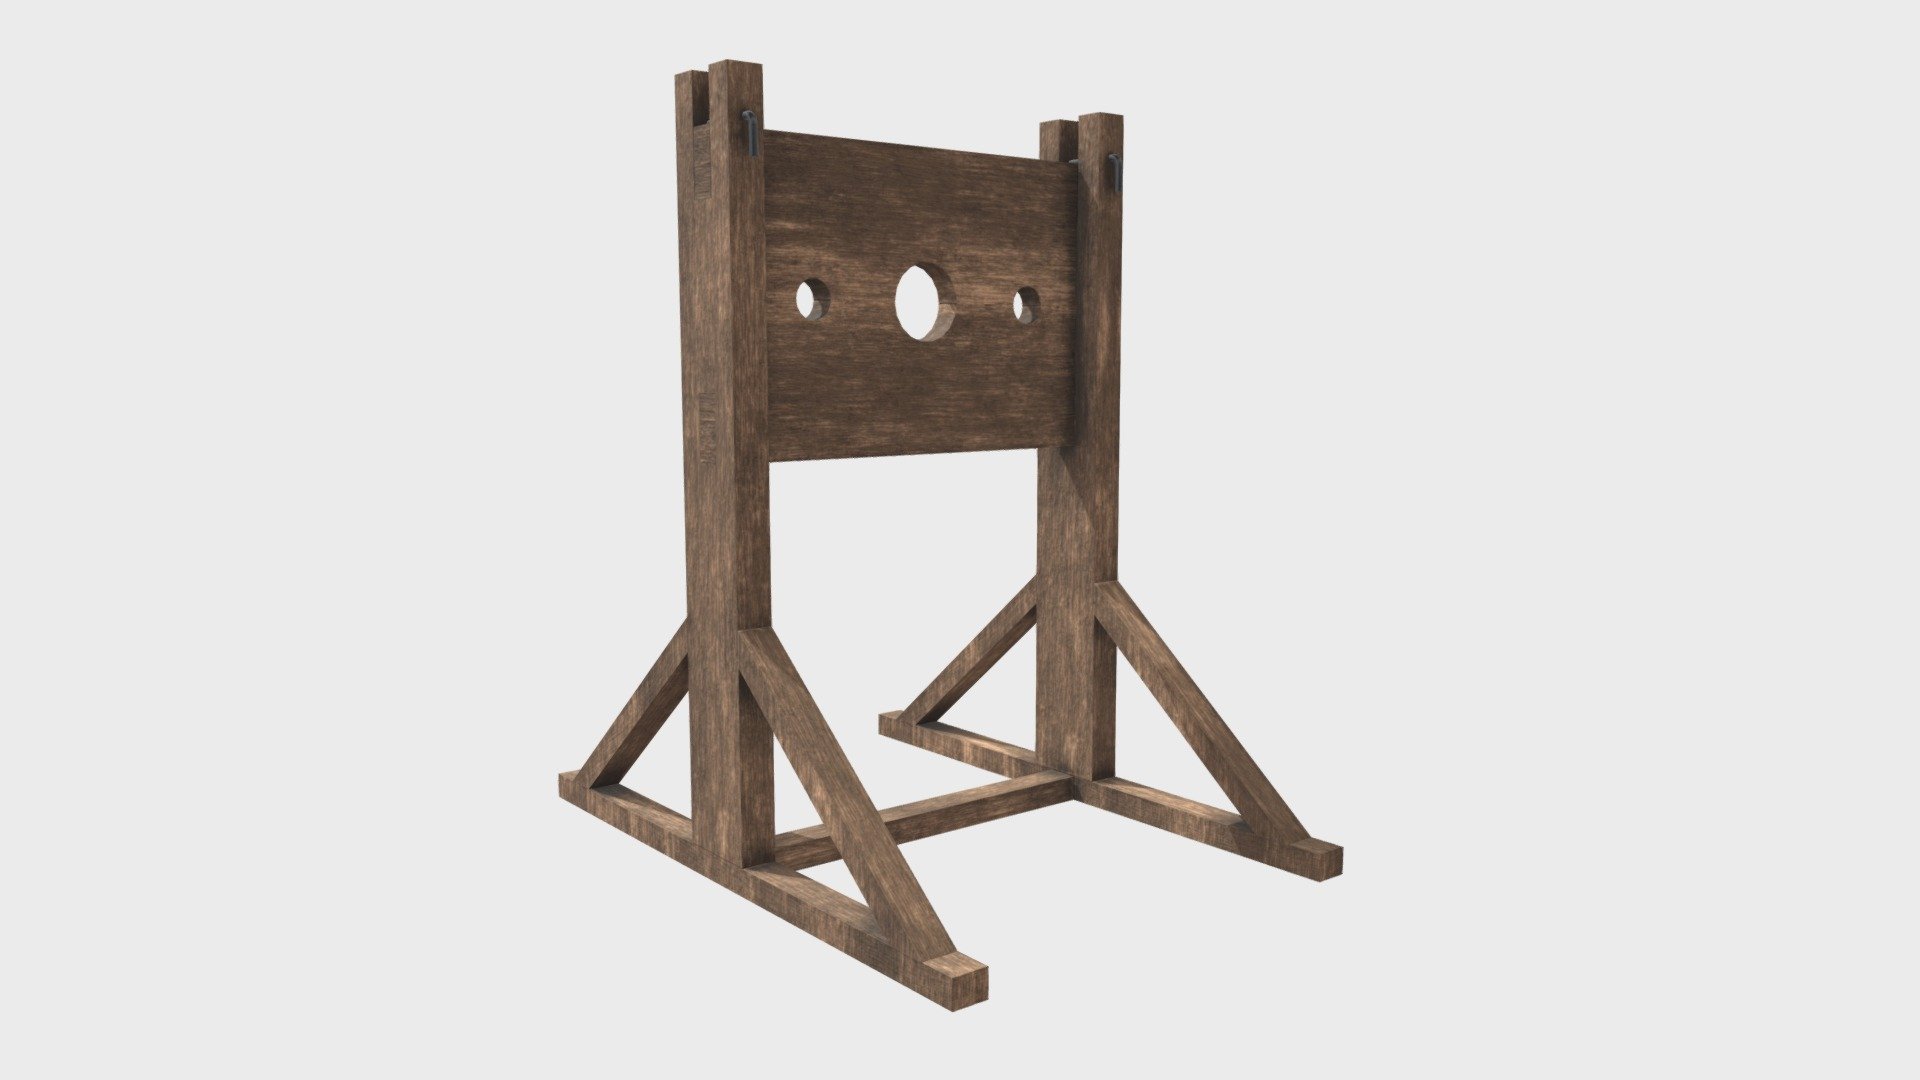 Medieval pillory